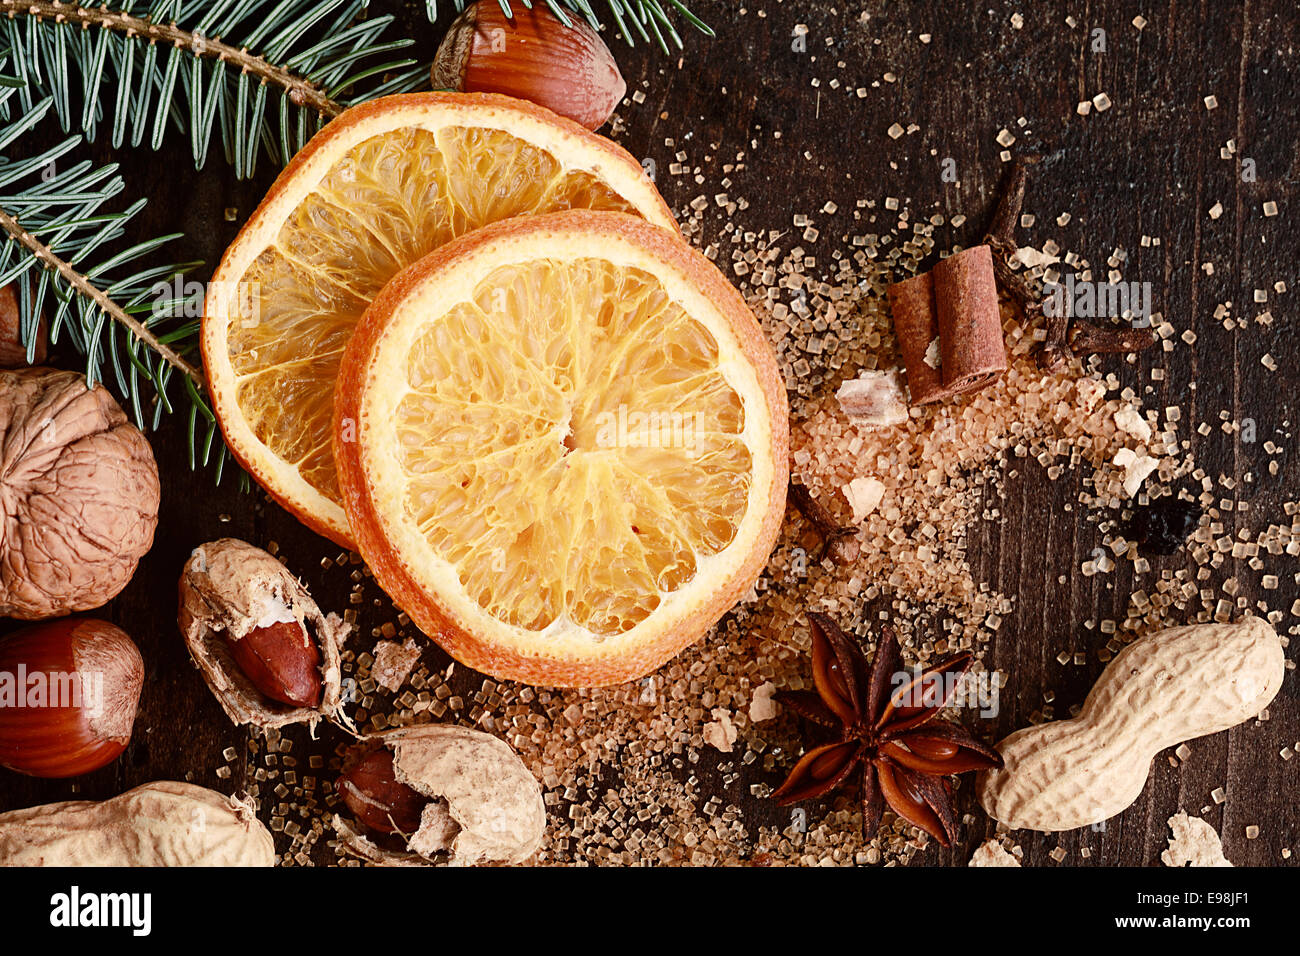 Sweetened Christmas Orange, Nuts on Side, on Brown Wooden Table. Stock Photo